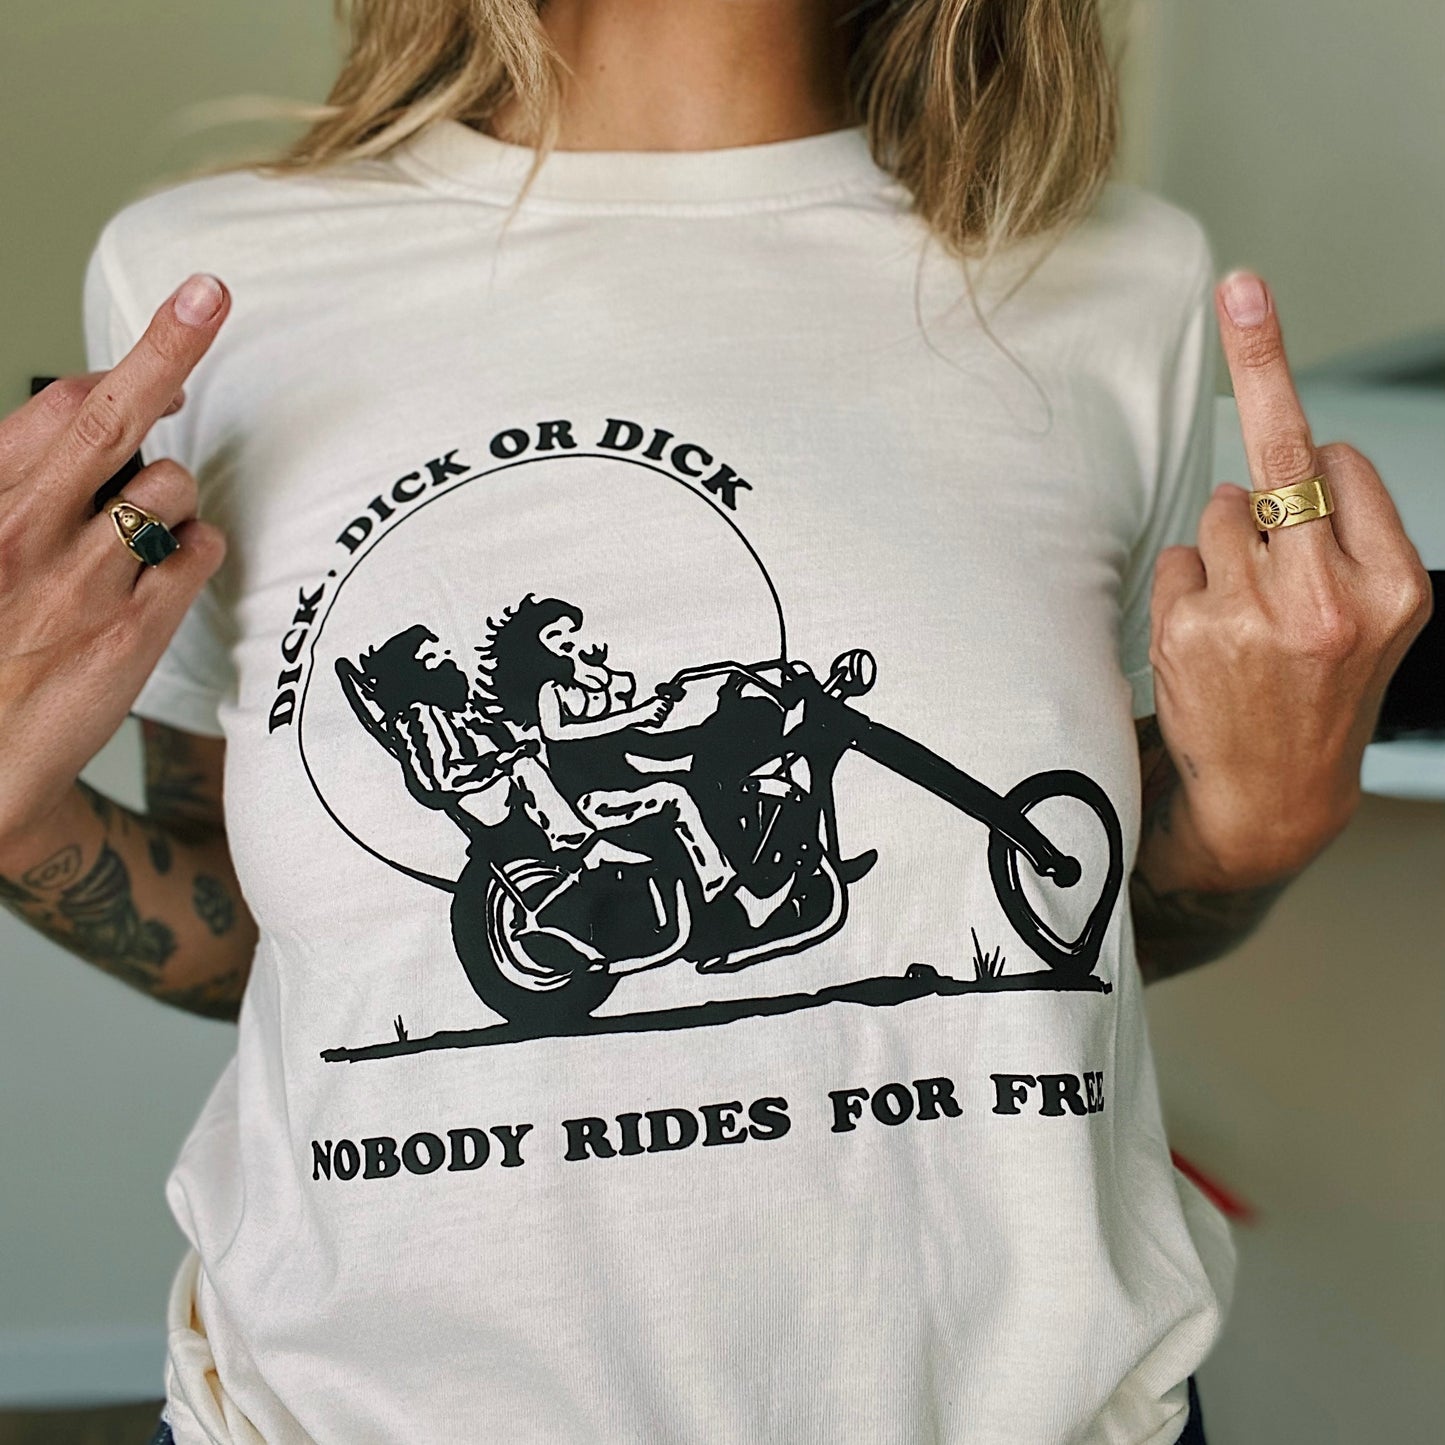 Axel Co  "Nobody Rides For Free" Motorcycle T-Shirt